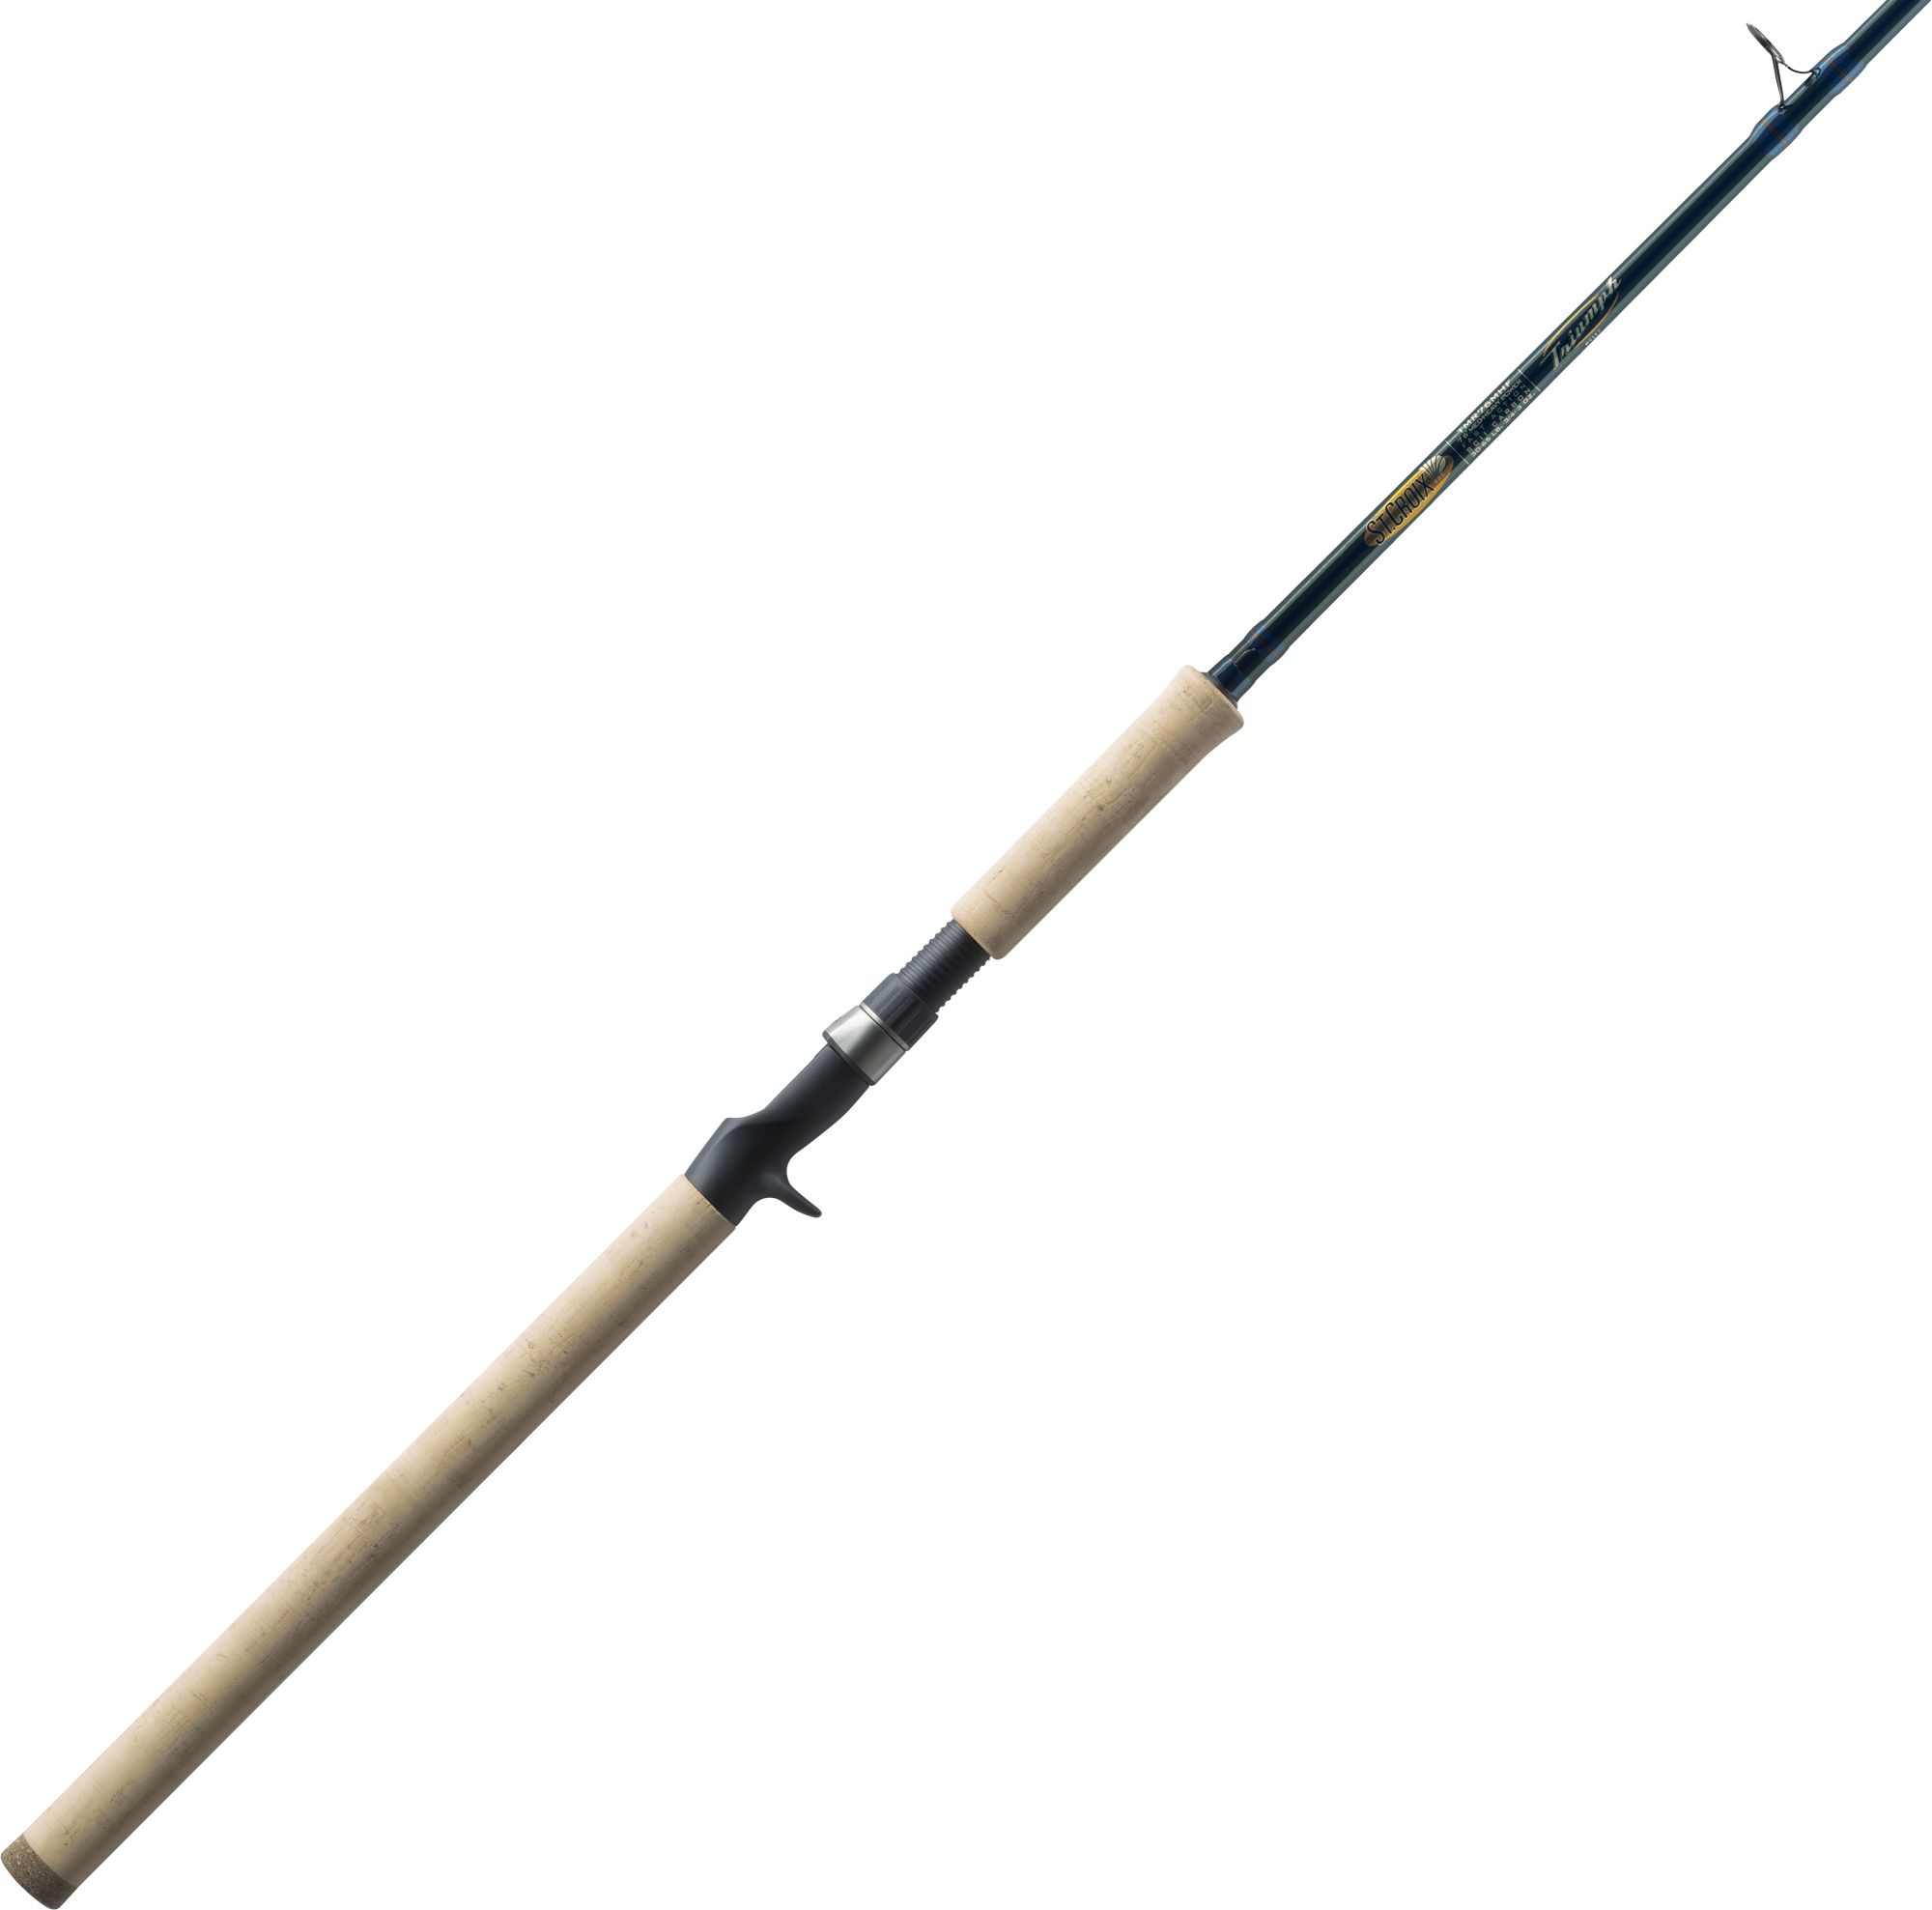 Photos - Other for Fishing St. Croix Triumph Musky Casting Rod  20SCXAMSKY7MDHVYFROD (2021)